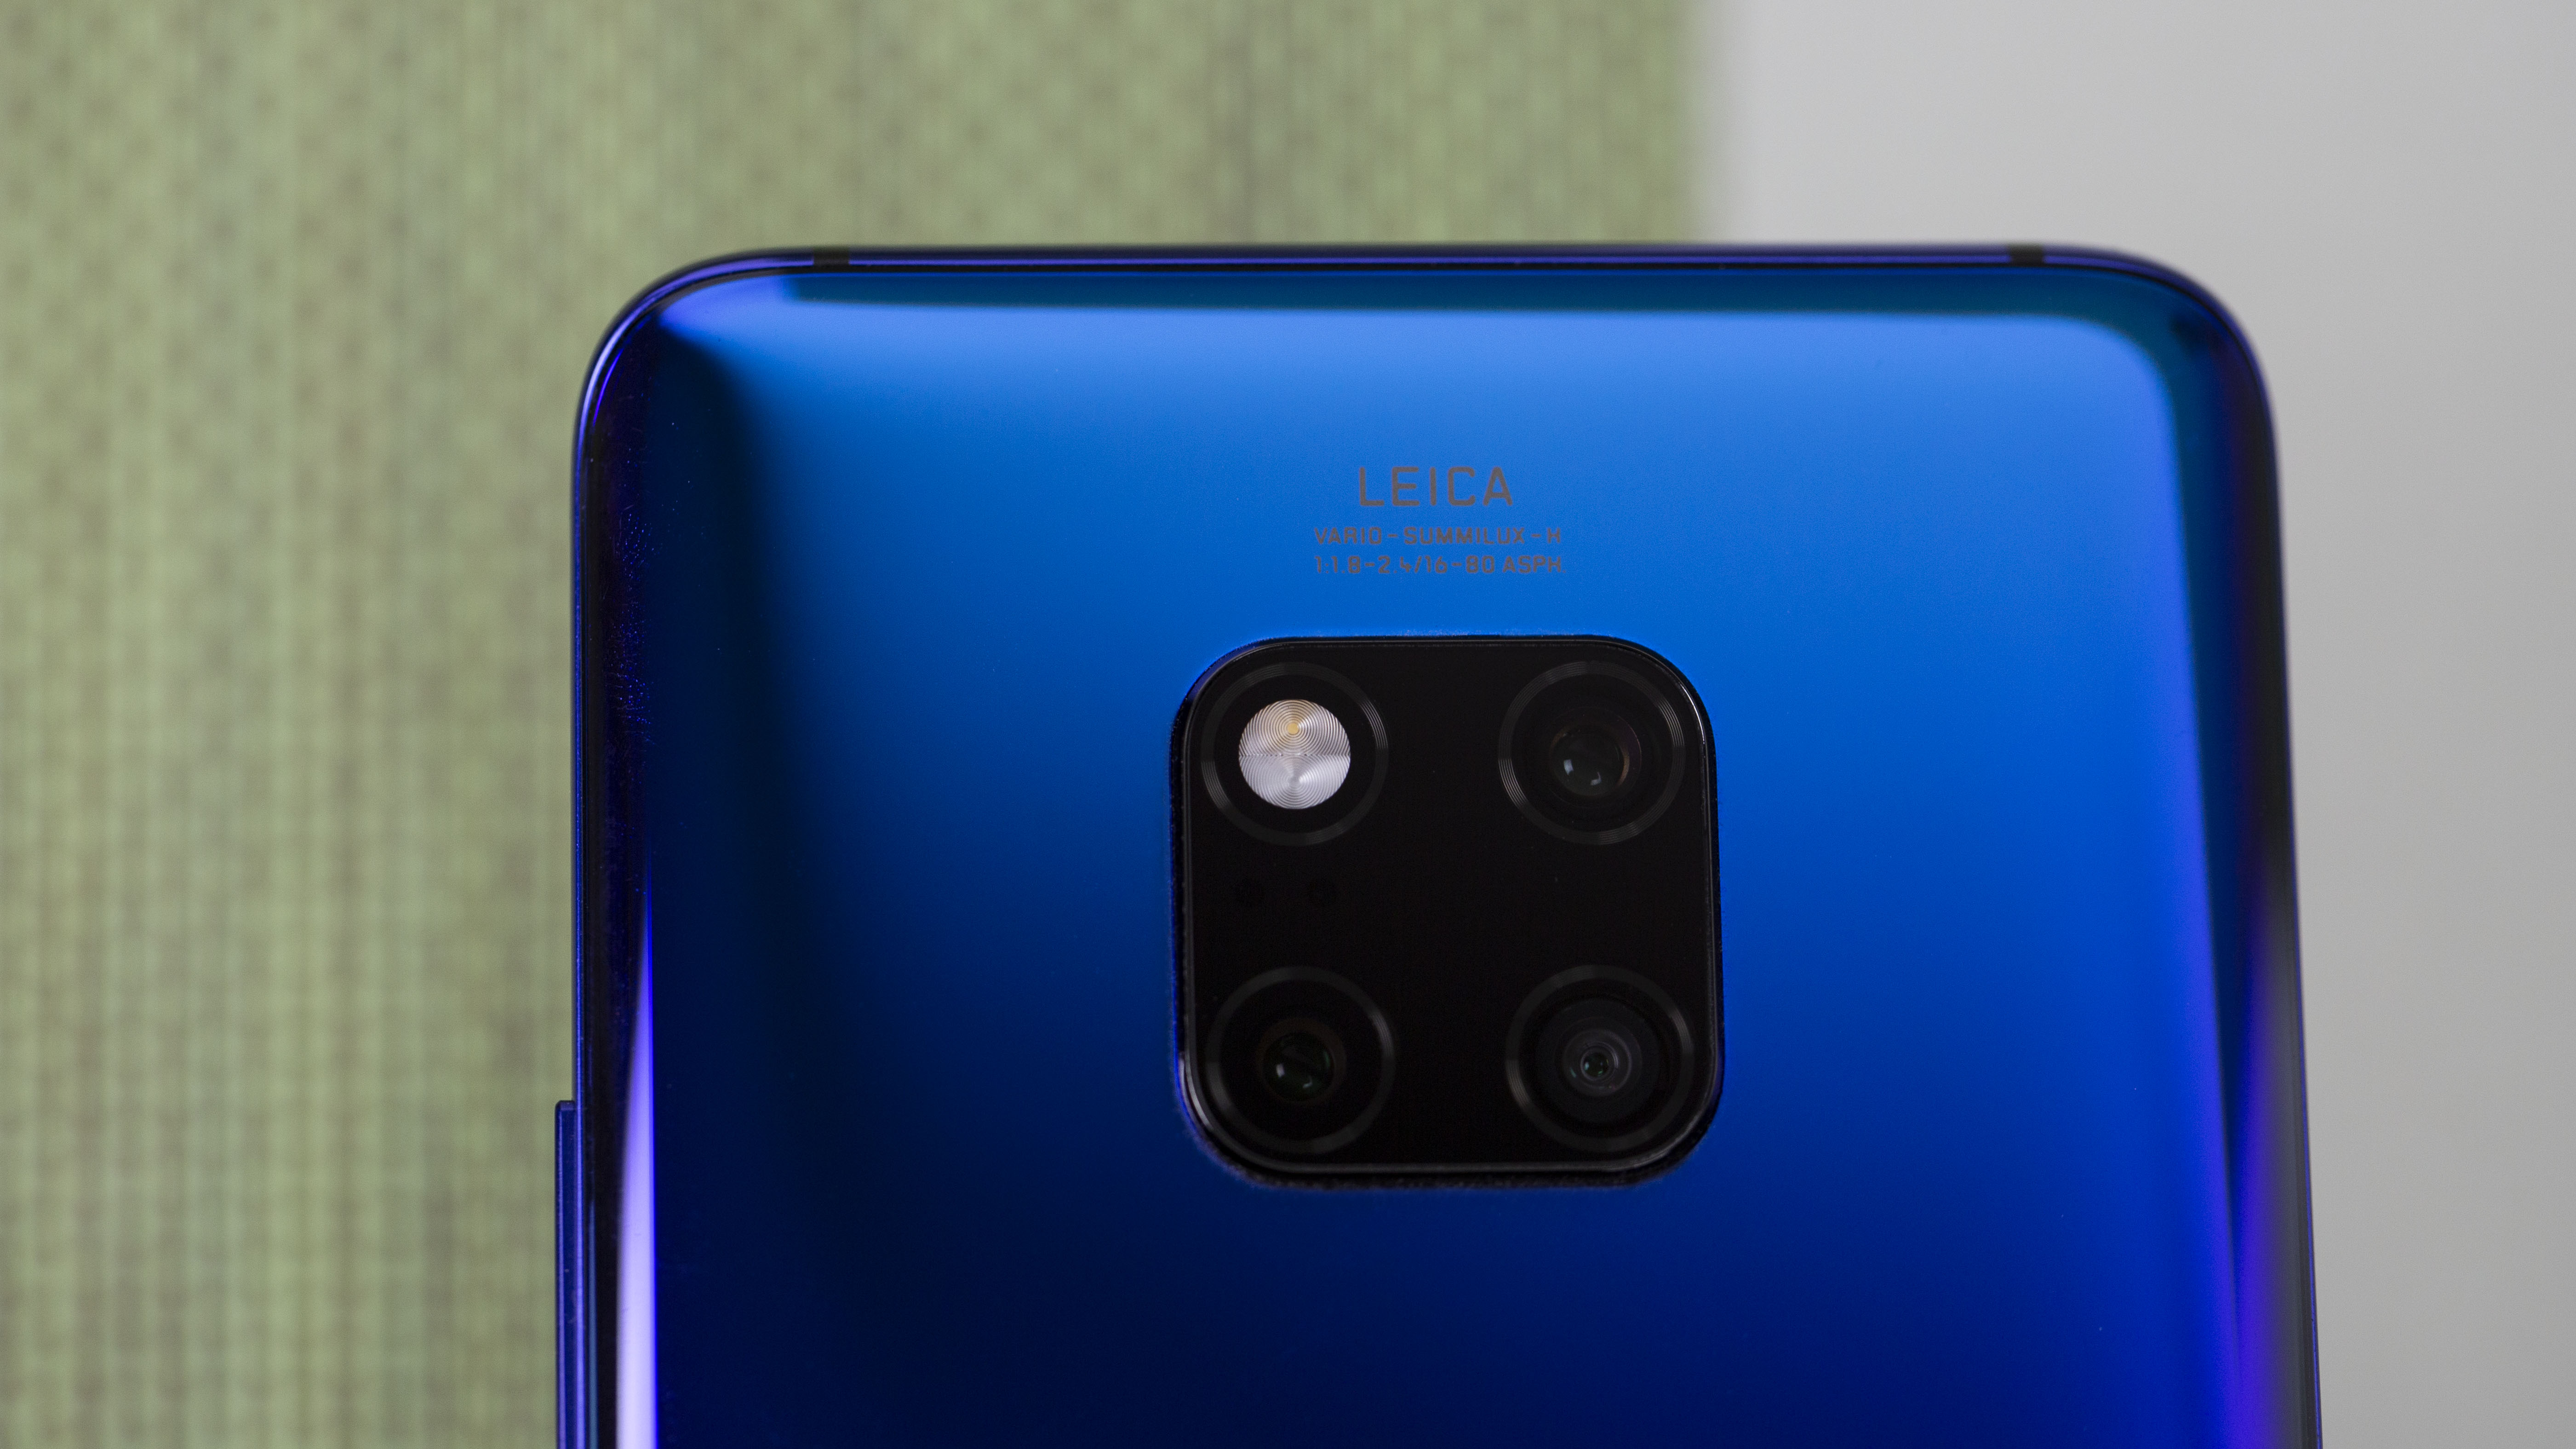 Huawei Mate 20 Pro is back in the Android Q beta | AndroidPIT